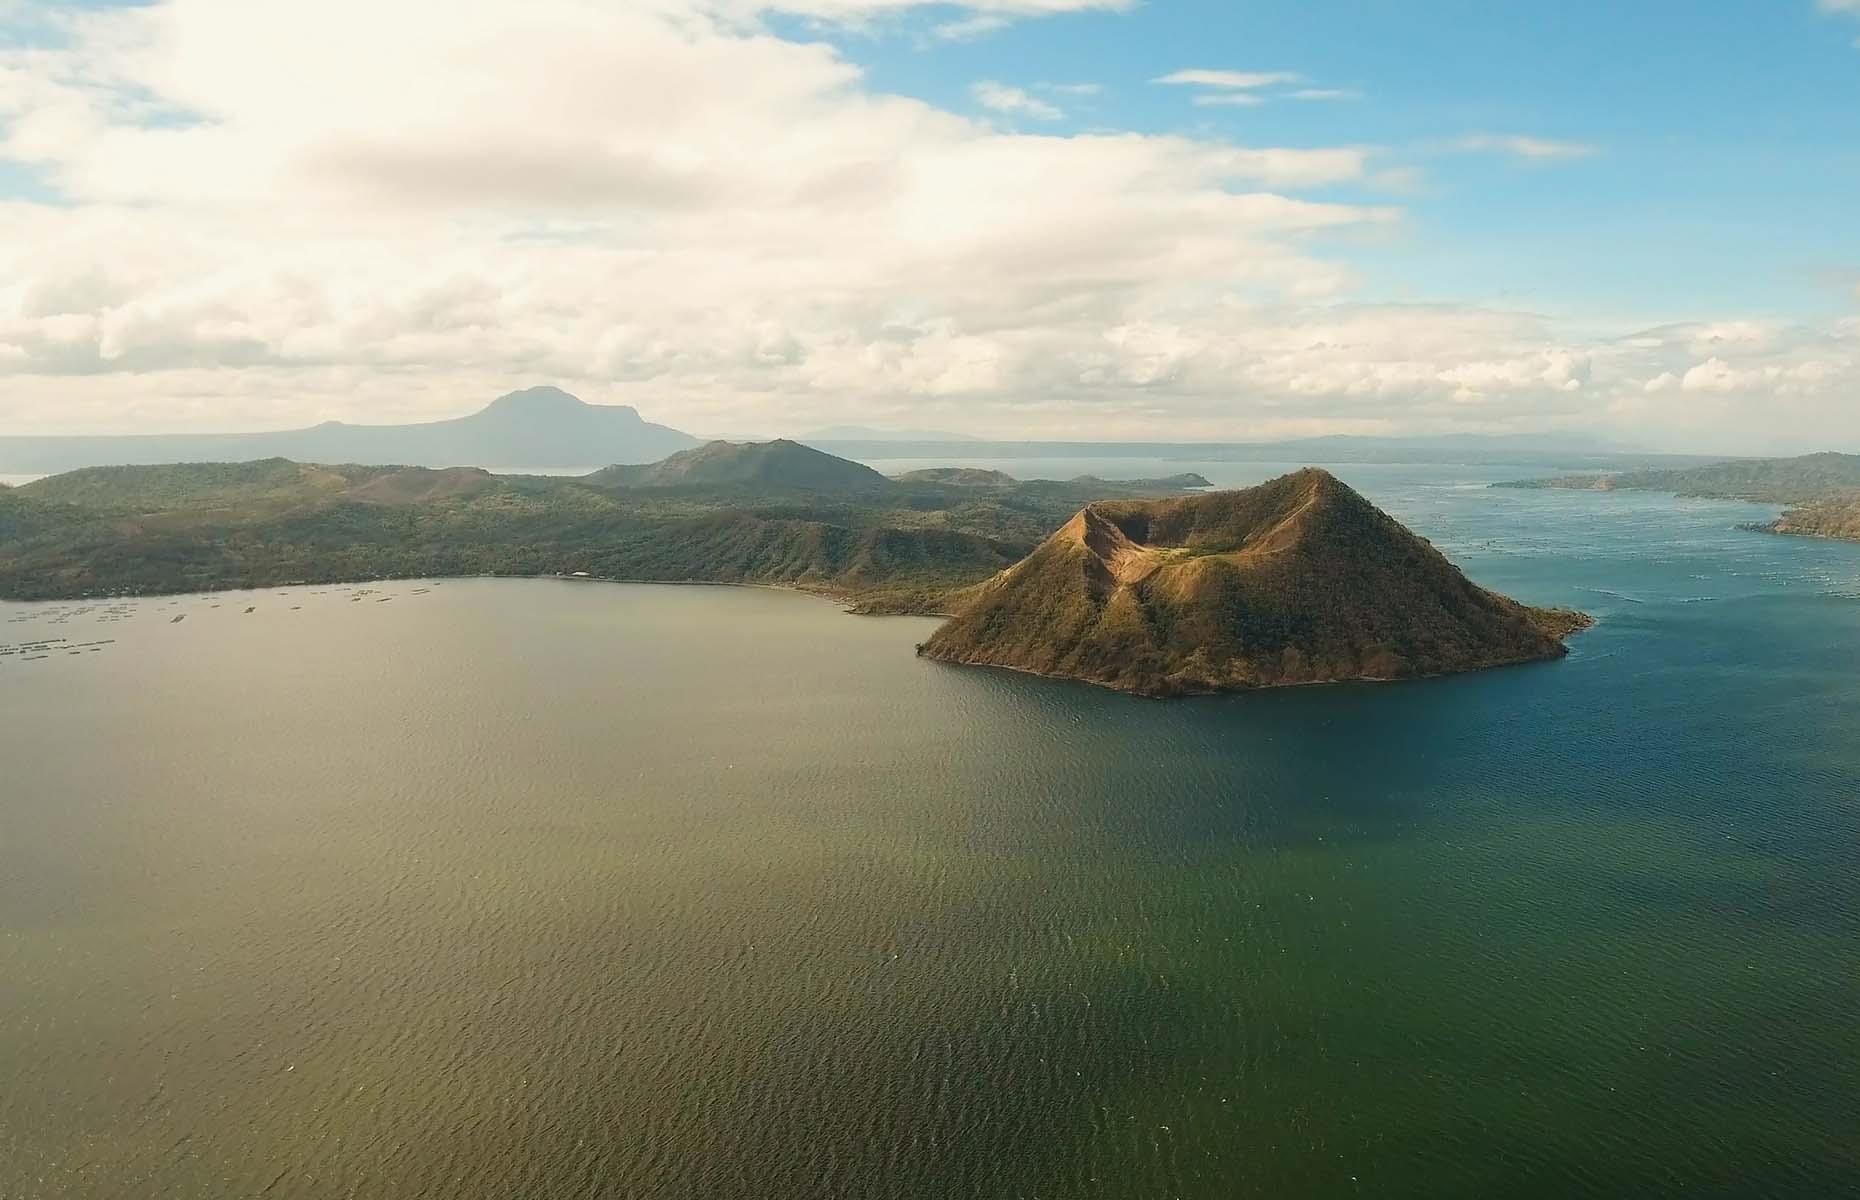 The world’s smallest active volcano is famous for sitting in a lake within a volcano. The still green water belies the fact that it’s a volatile area – Taal is the country's second most active volcano and its most recent eruption in January 2020 spewed ashes over Calabarzon, Metro Manila and some parts of Central Luzon and Ilocos Region. This resulted in the suspension of school, work and flights in the area.